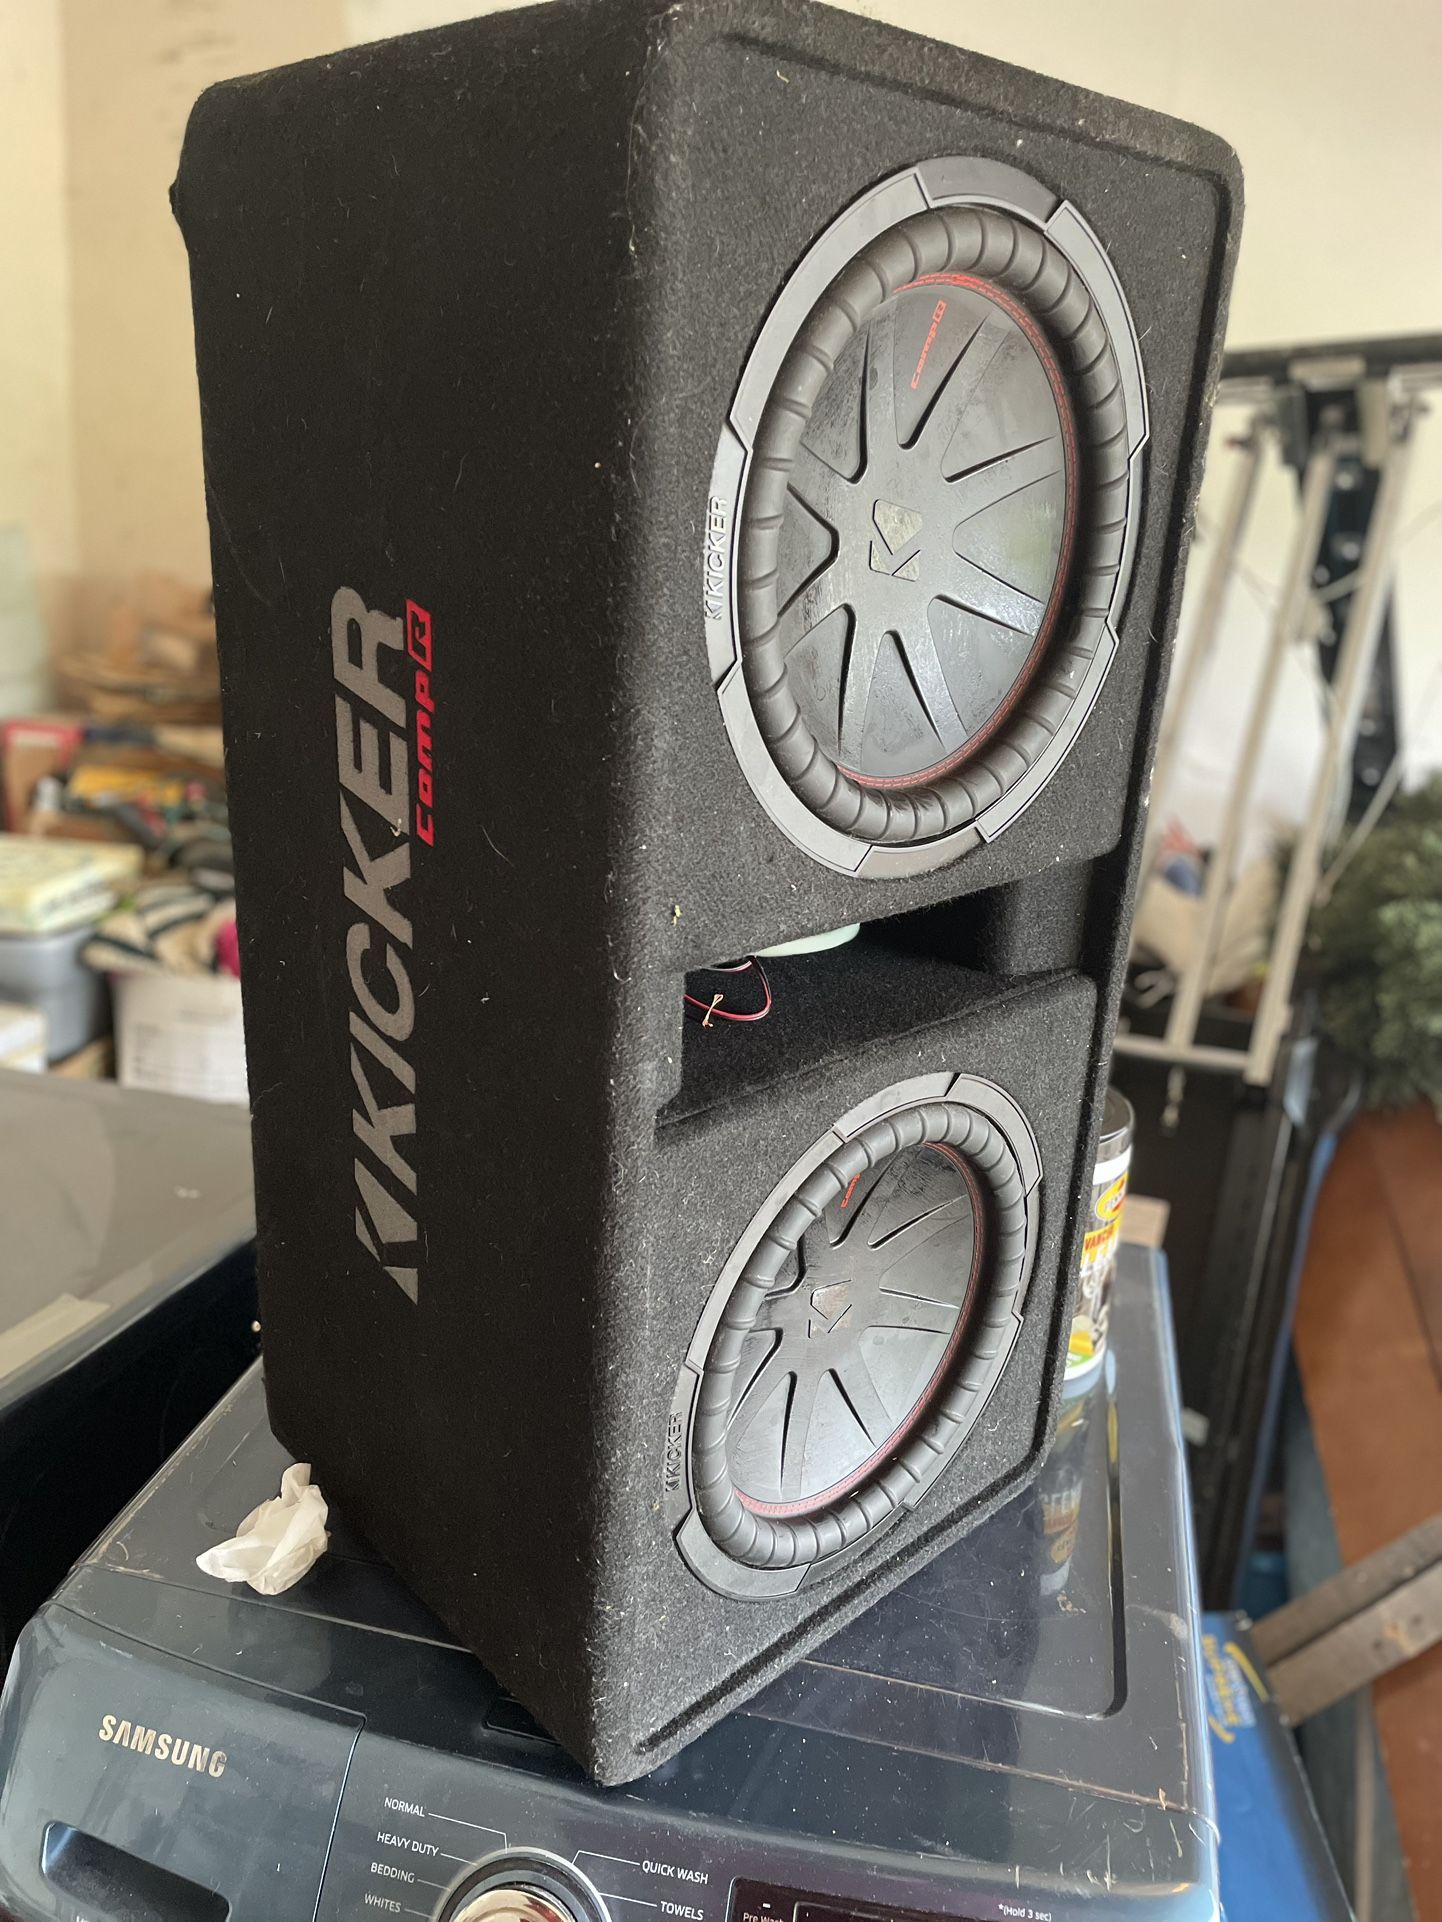 2 12” Kickers In Box, 1 10” Kicker In House Box, Speaker Wire And Wire To Install On Factory Radio